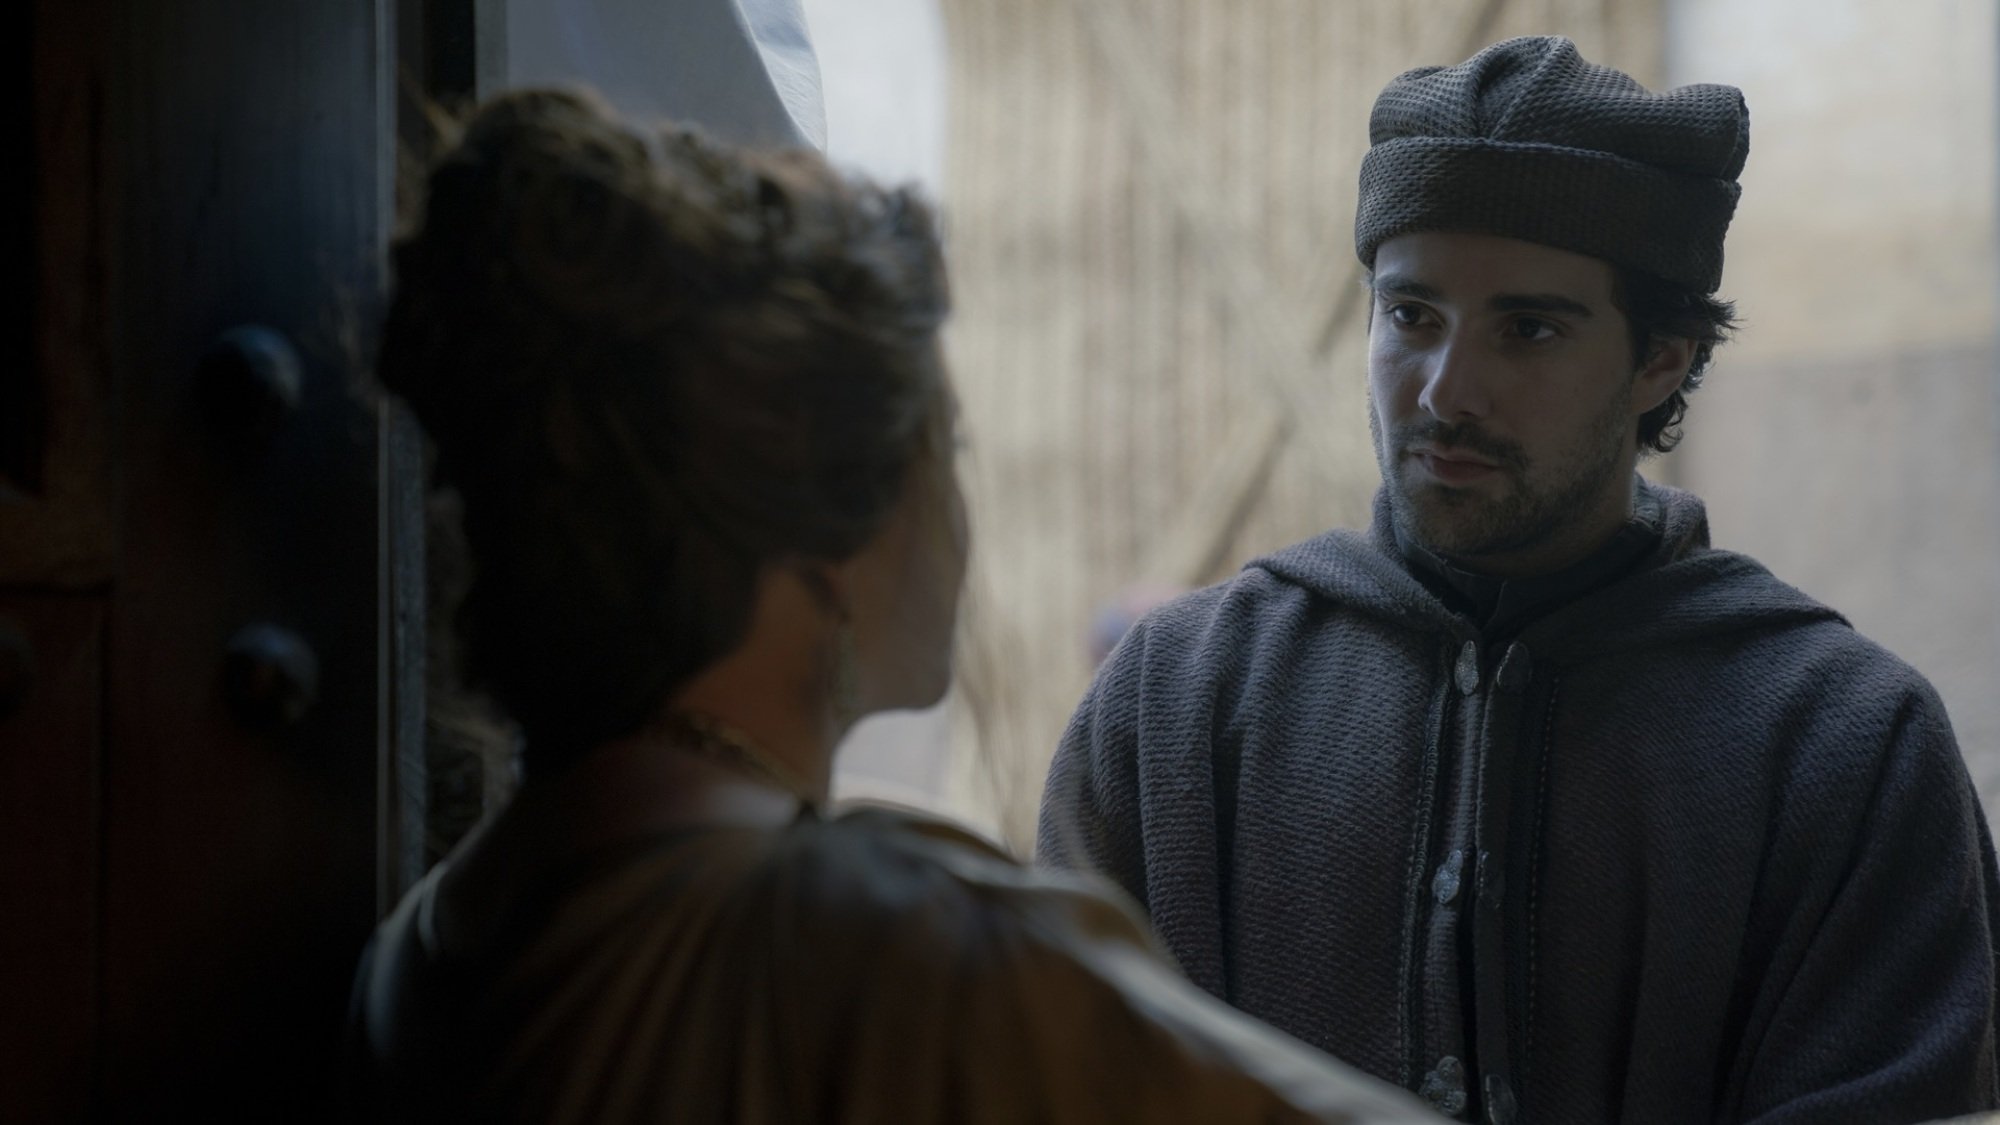 A man in a brown cloak and hat stands in a door, listening to a woman speak to him.